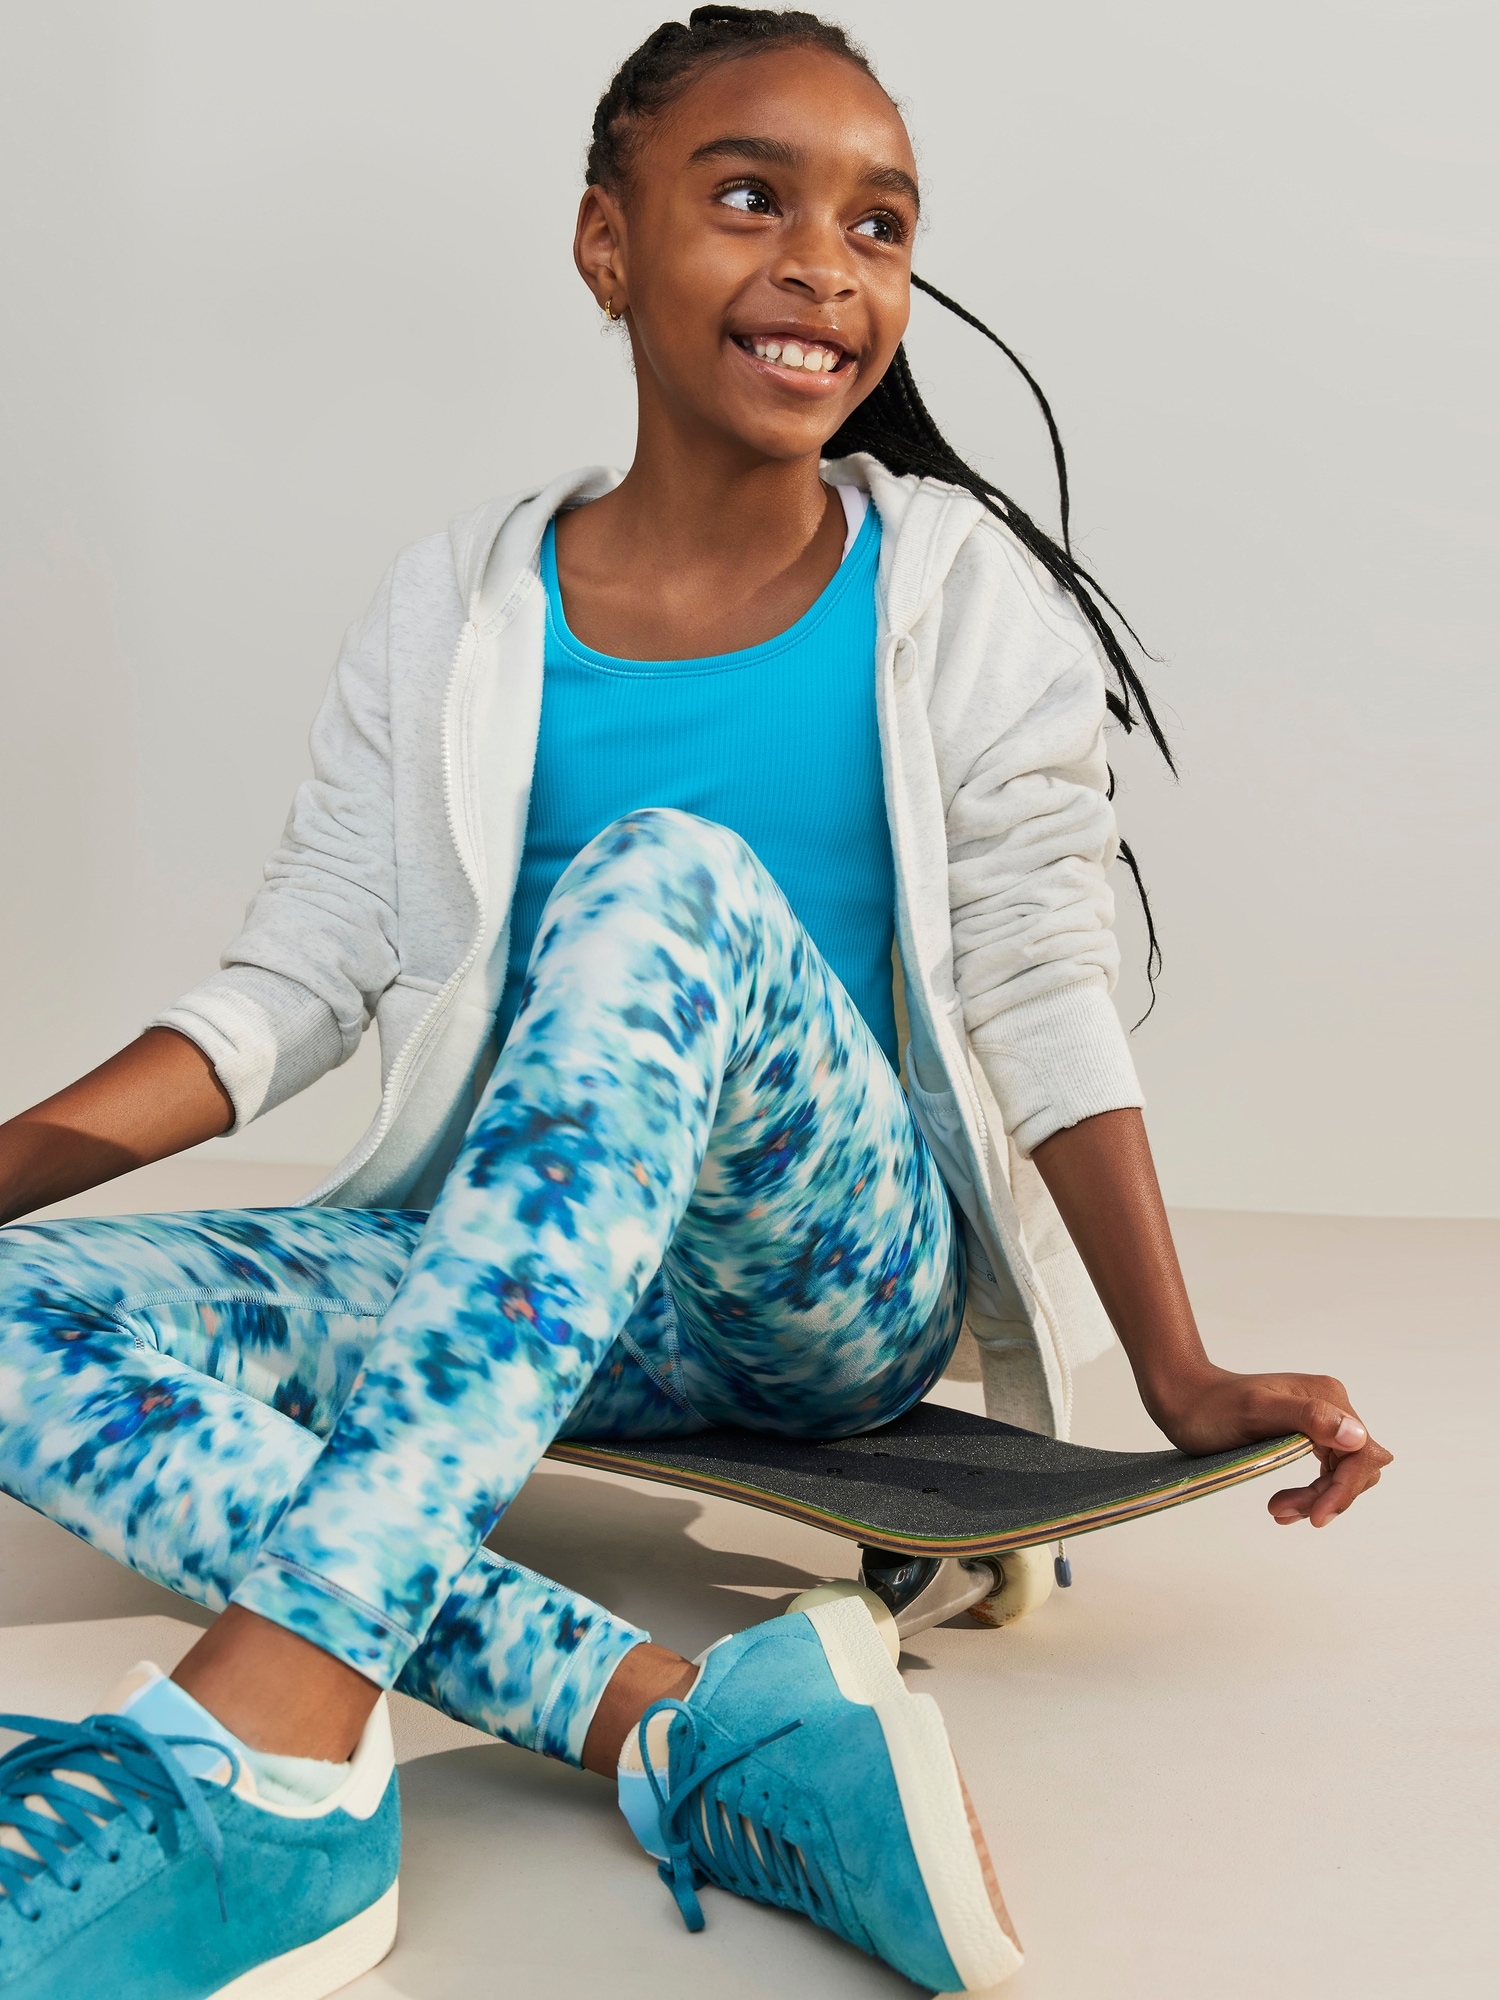 Athleta Girl Printed Chit Chat Tight, Gym Class Hero! This Brand Has the  Best Mother-Daughter Fitness Sets